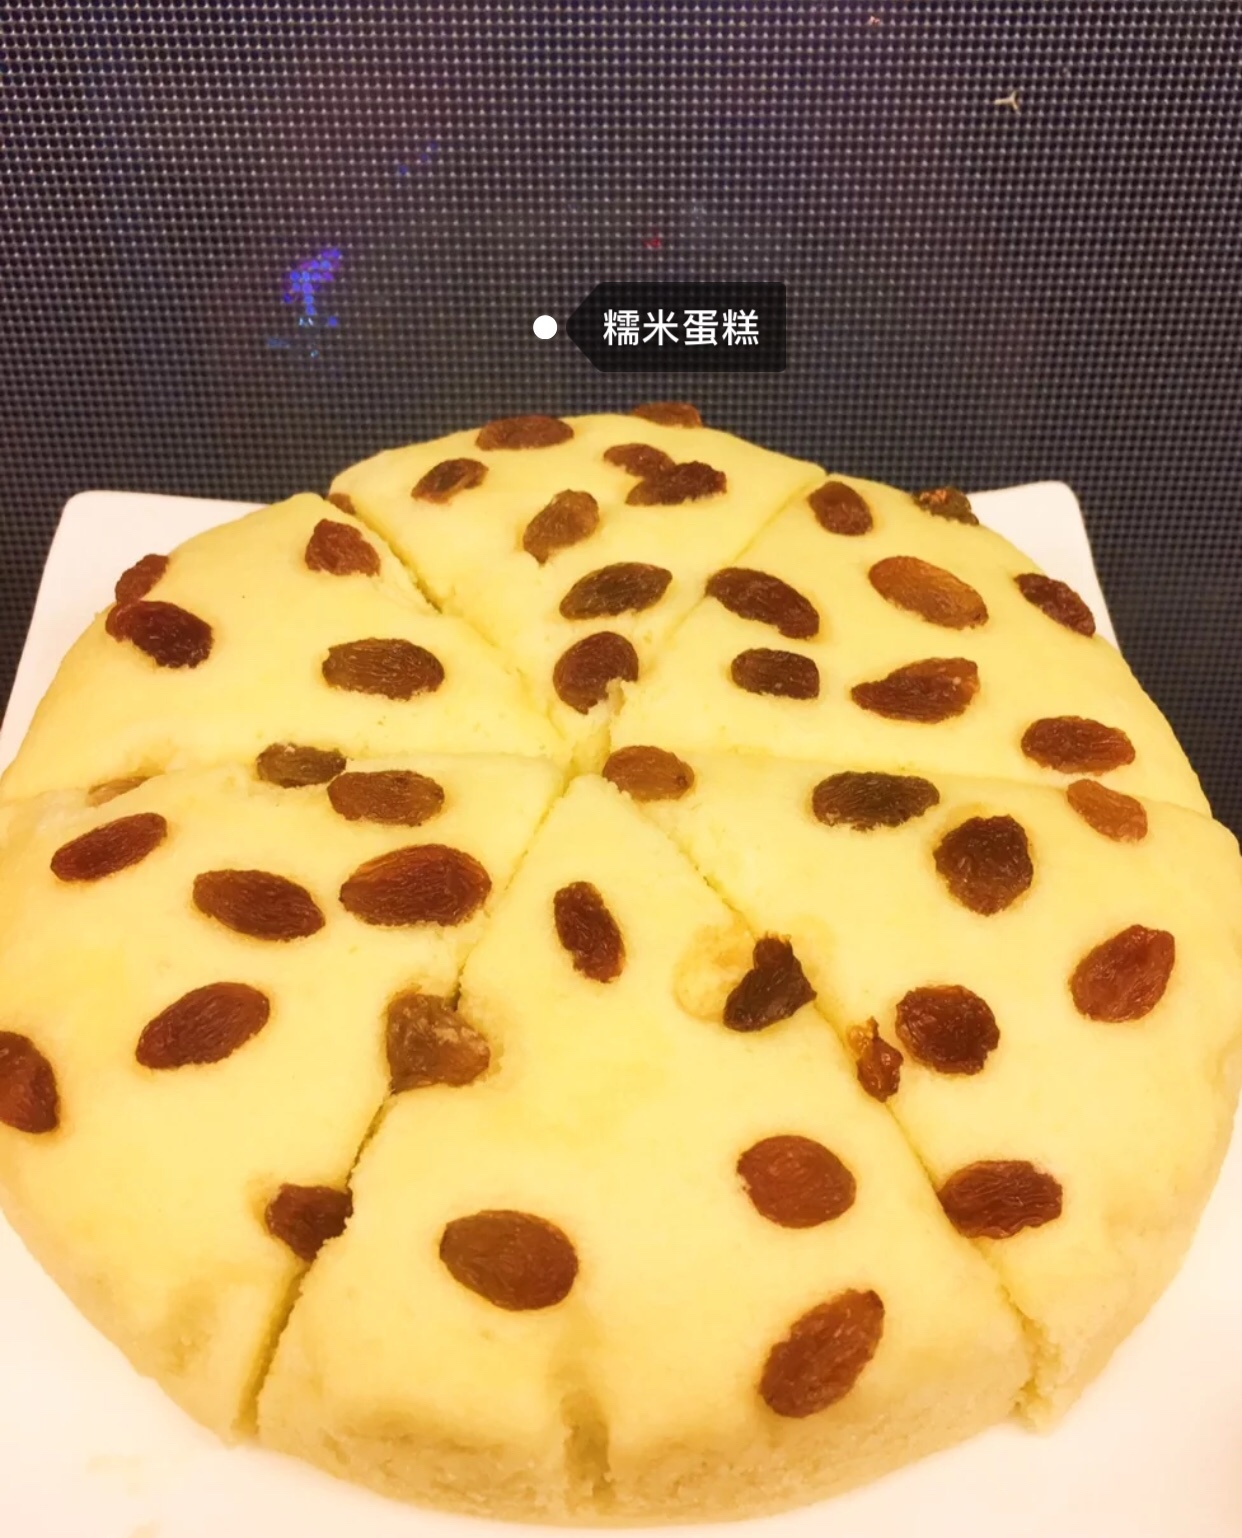 
Cake of evaporate polished glutinous rice, need not divide an egg need not oven makes noodles or vermicelli made from bean or sweet potato starch without bubble without oily anhydrous, the practice that the novice also can succeed